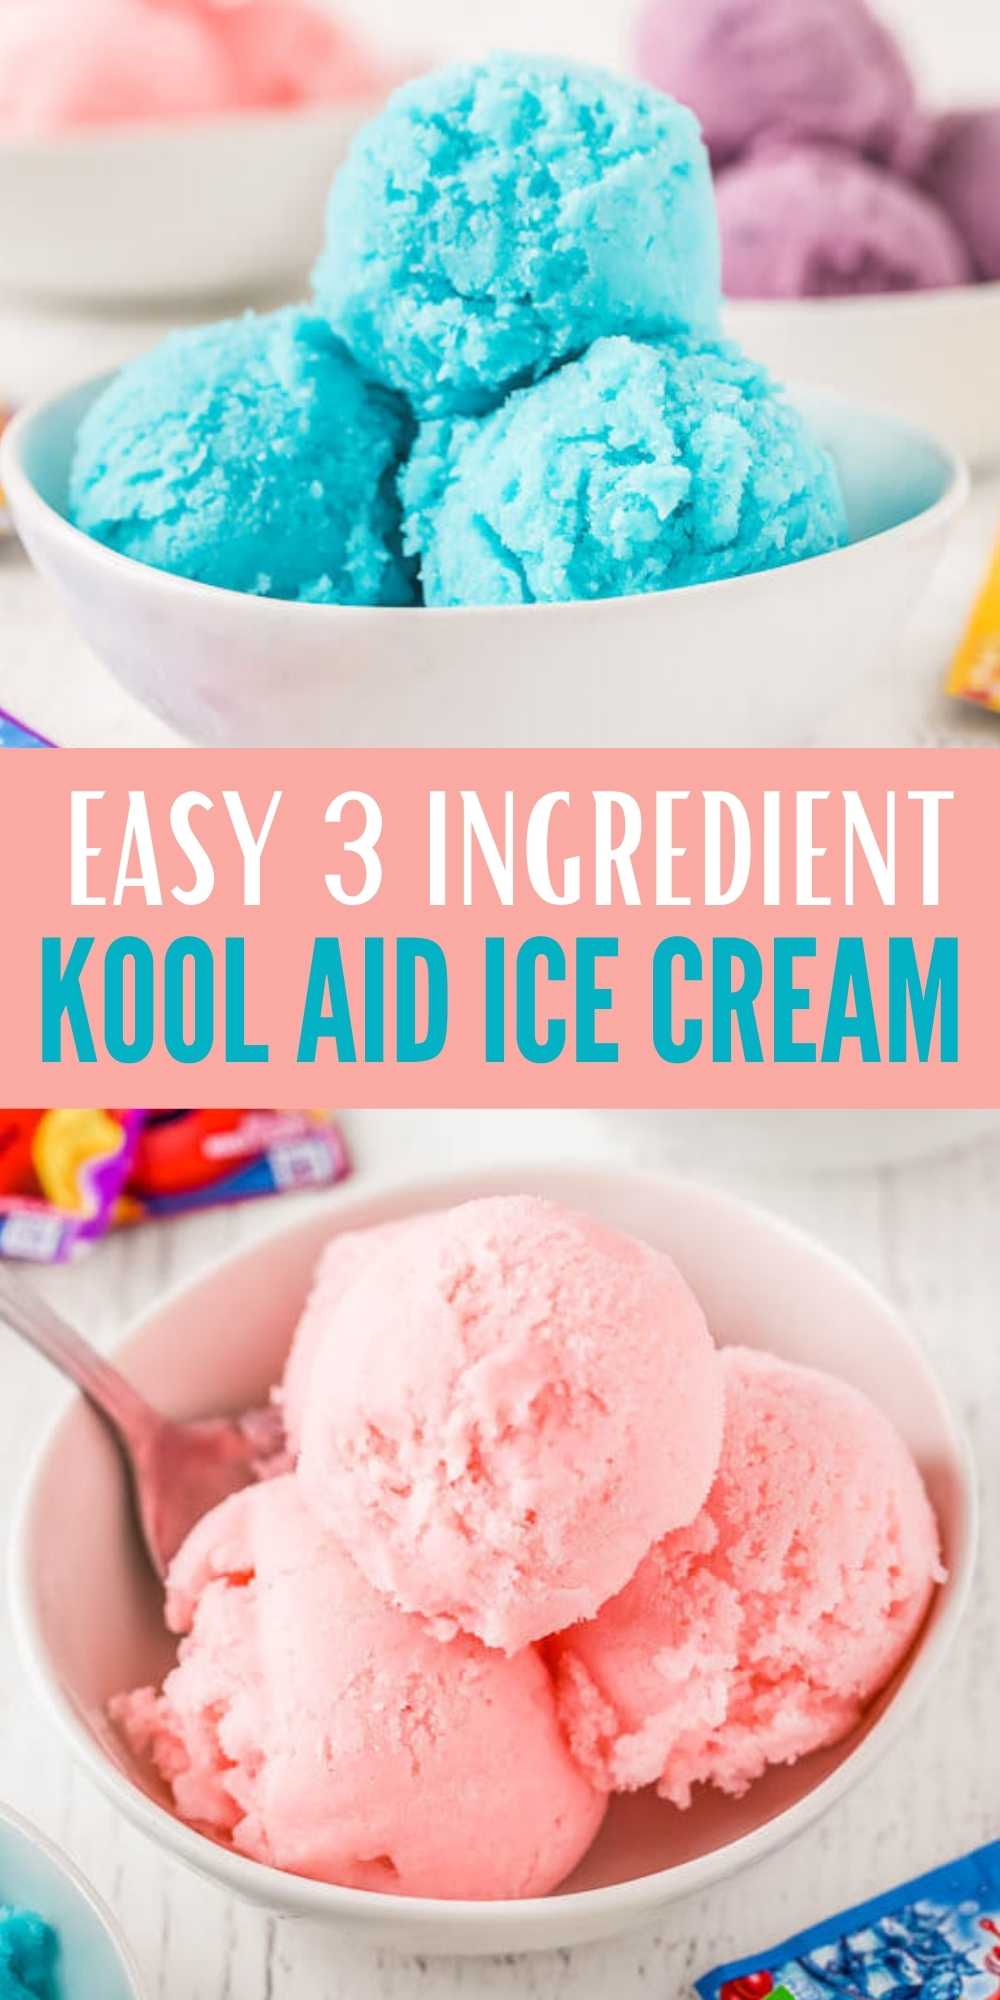 Everyone will love this easy kool aid ice cream recipe with only 3 ingredients.  Learn how to make this homemade kool aid ice cream.  It is easy to make and the kids love it too! Everyone can pick their own flavor of kool aid! #eatingonadime #icecreamrecipes #koolaidrecipes 
